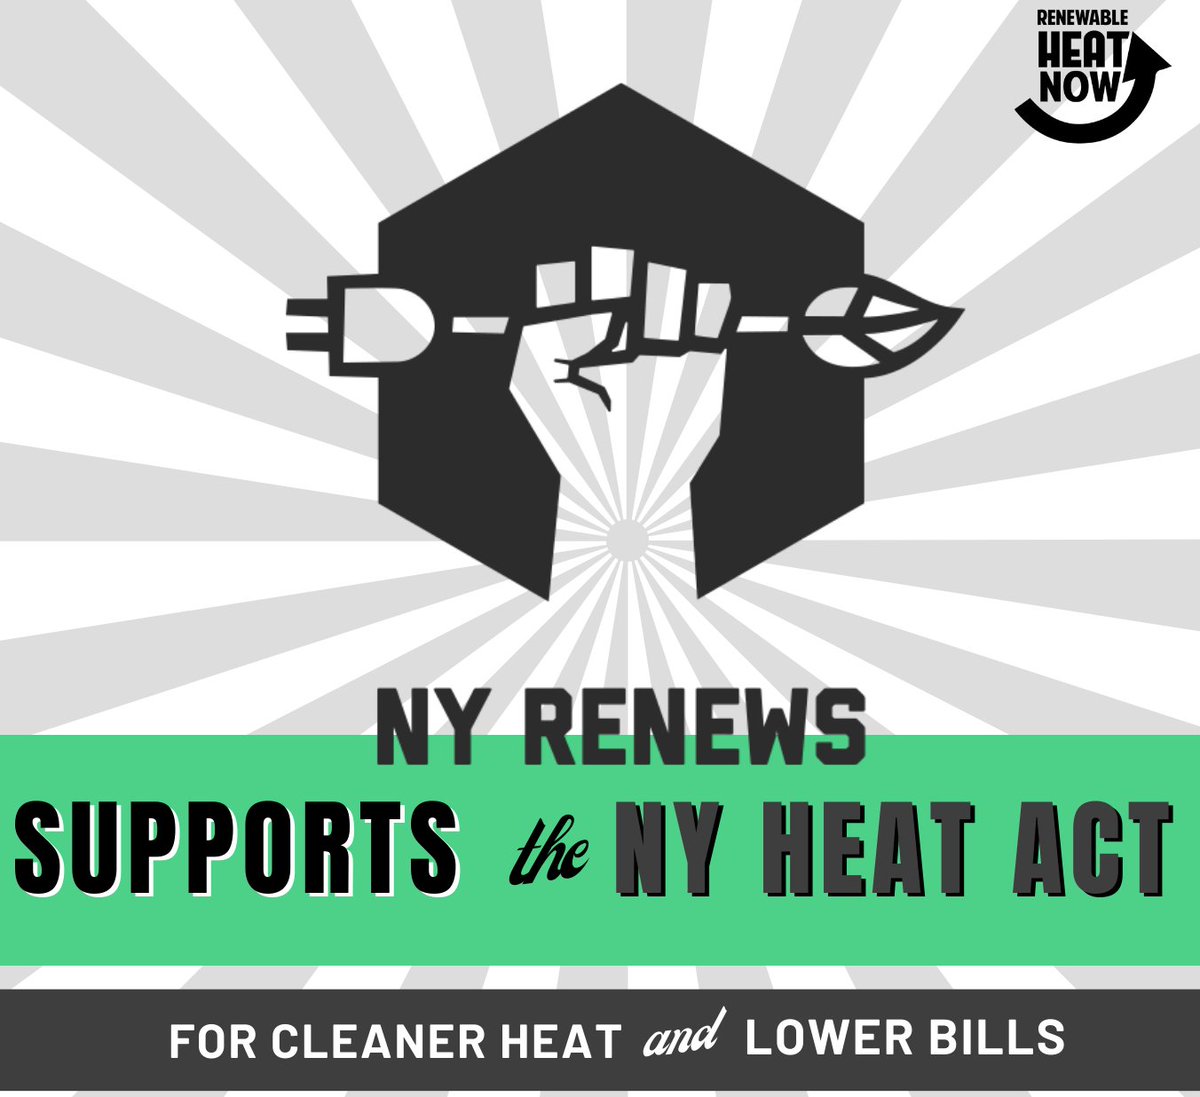 #NYHEAT is about economic justice! @SenatorLeaWebb said it best: “The fact that we have working families in 2024 still making decisions about paying their utility bills or putting food on the table is unacceptable.” Let’s change that! @CarlHeastie @DeborahJGlick @kenzebrowski_ny